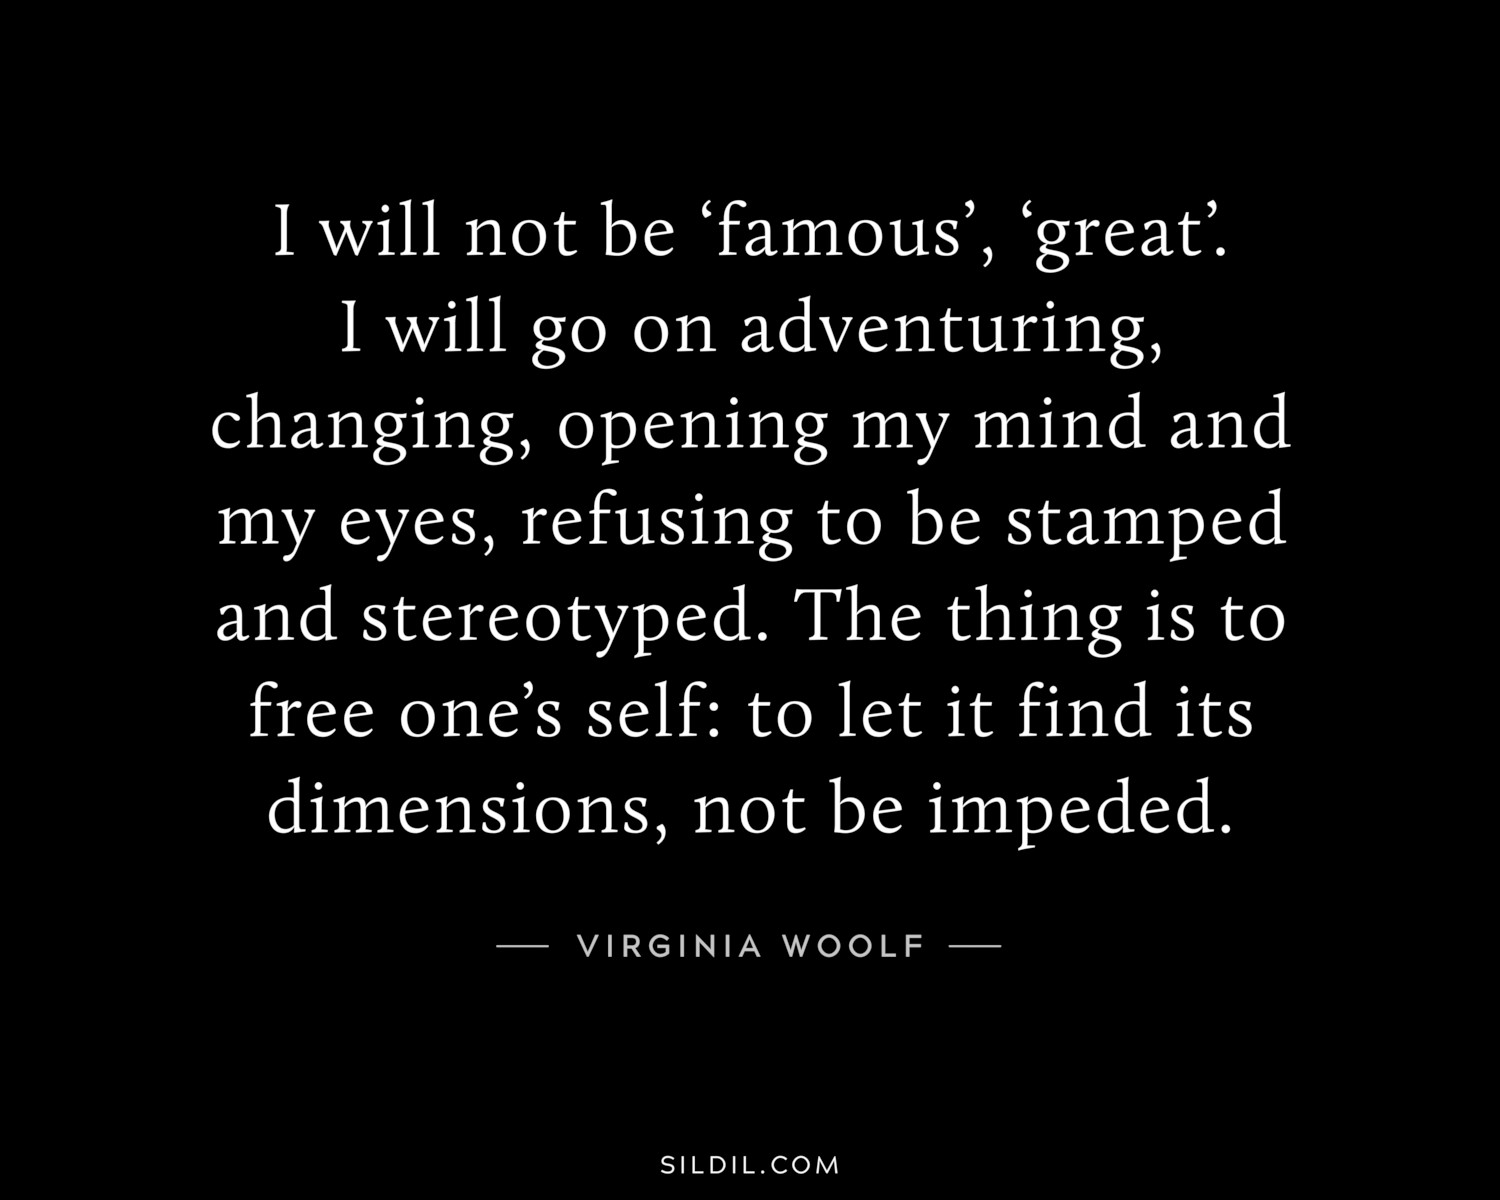 I will not be ‘famous’, ‘great’. I will go on adventuring, changing, opening my mind and my eyes, refusing to be stamped and stereotyped. The thing is to free one’s self: to let it find its dimensions, not be impeded.